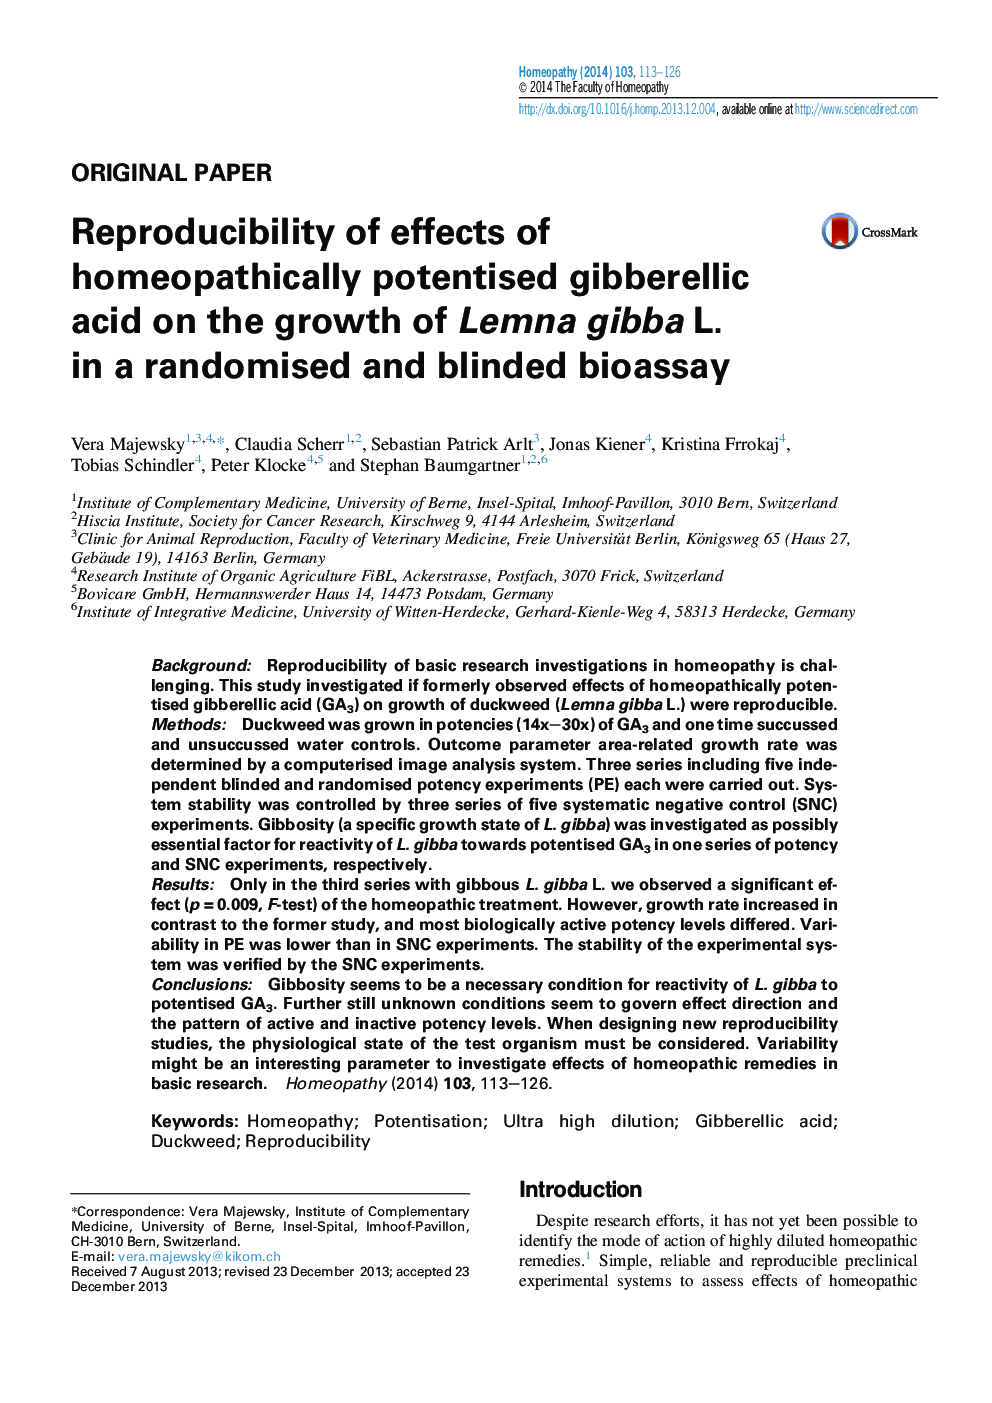 Reproducibility of effects of homeopathically potentised gibberellic acid on the growth of Lemna gibba L. in a randomised and blinded bioassay